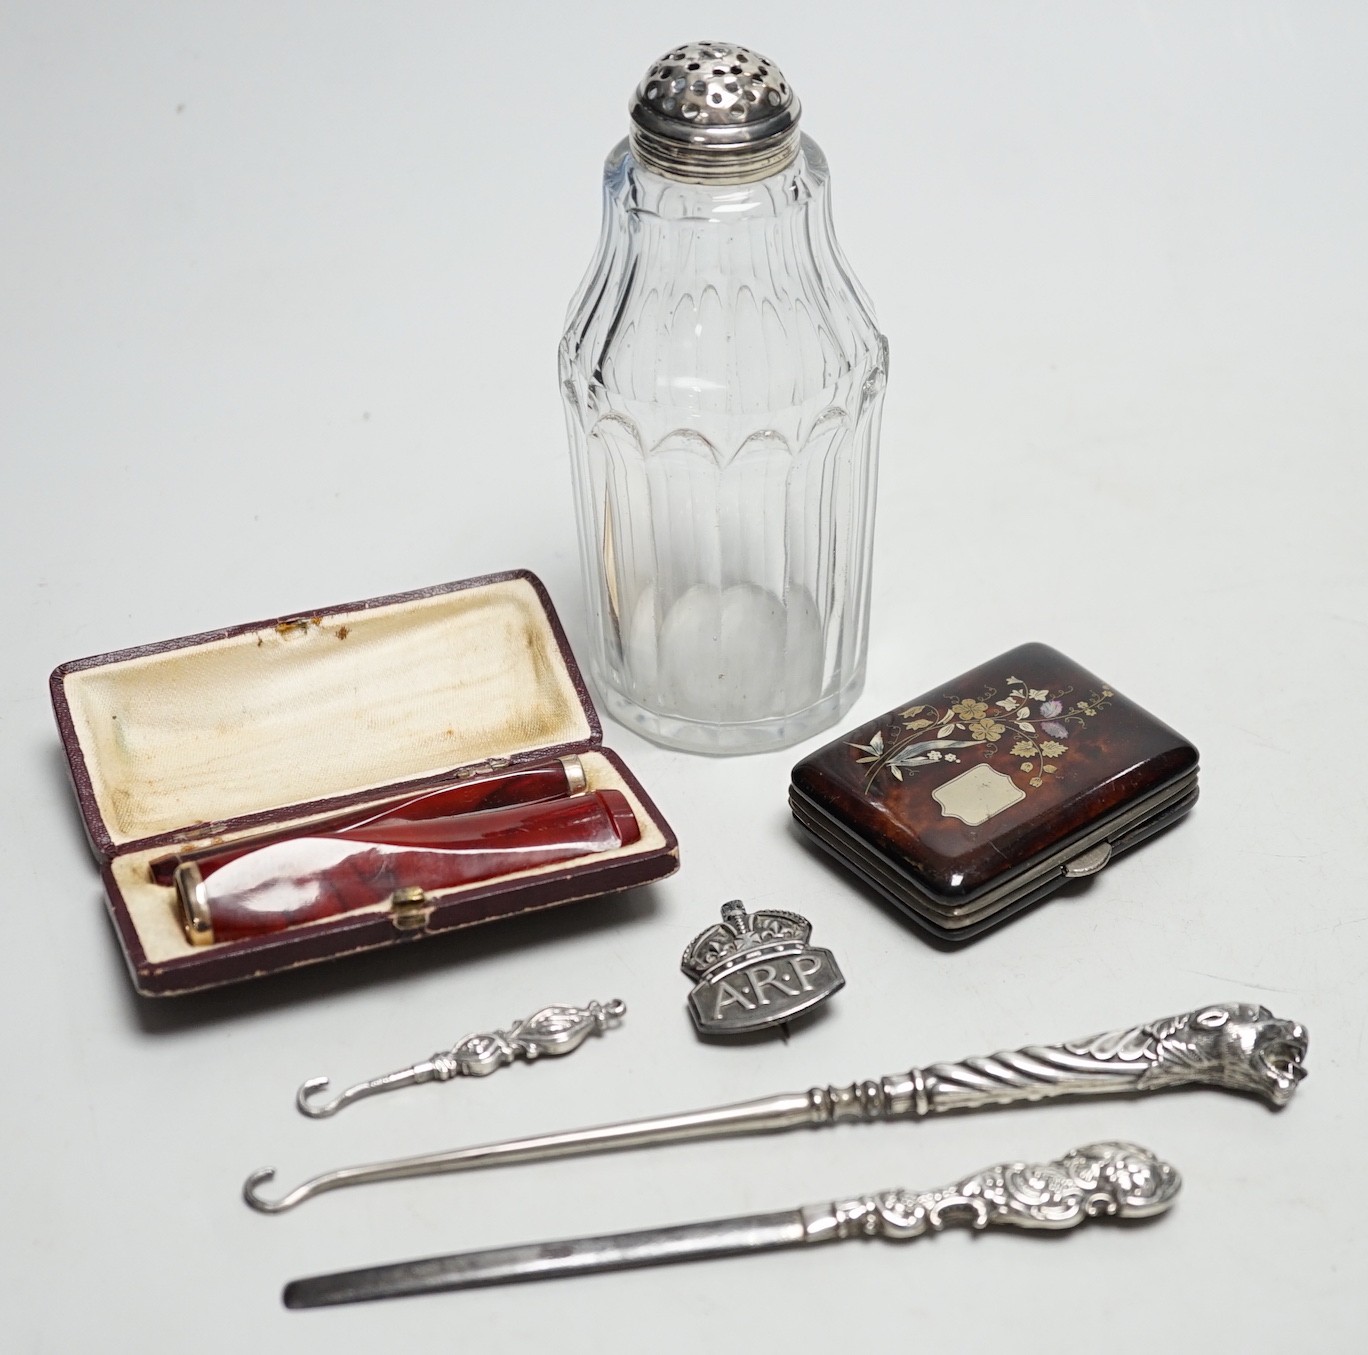 A Georgian silver mounted sugar sifter, a tortoiseshell and plique case, four silver items and two cased cheroot holders